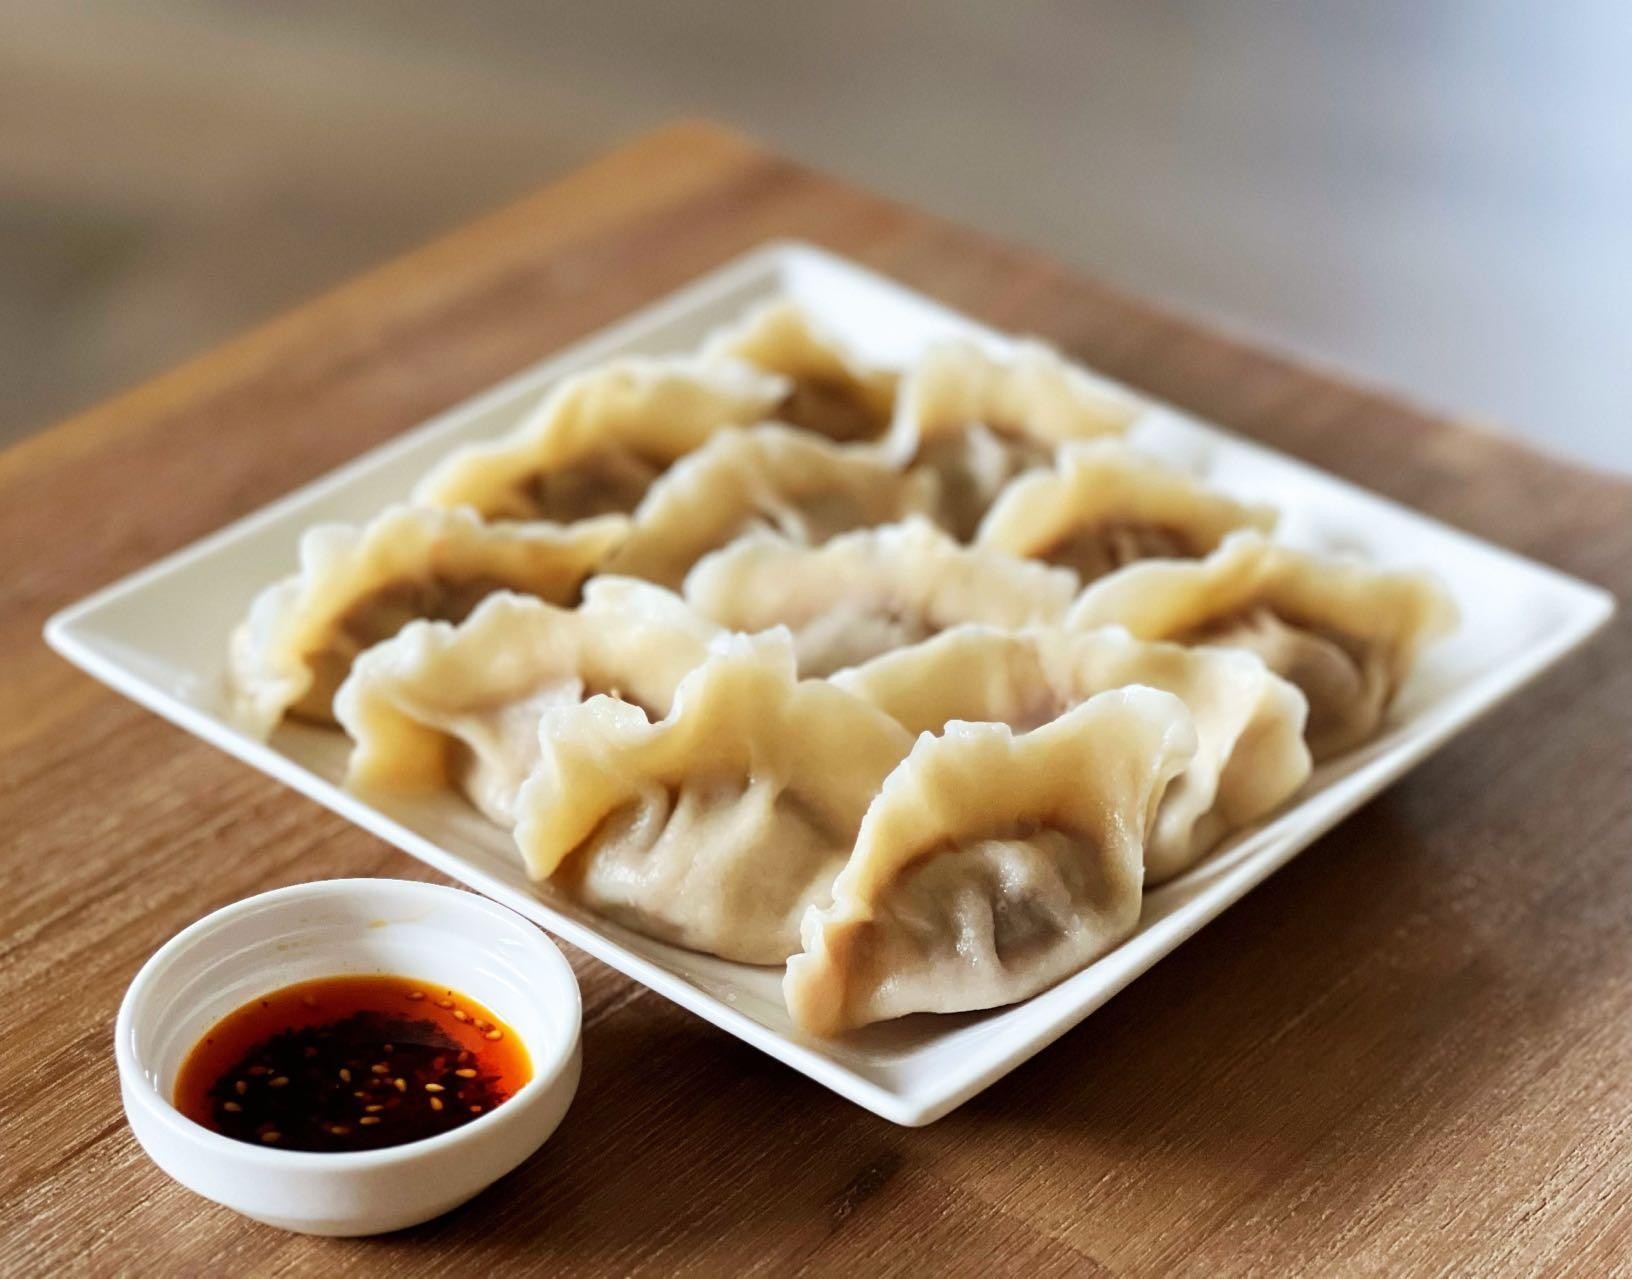 Handcrafted Dumplings - Lamb with Chinese Cabbage (10 Piece) 手工羊肉白菜水饺